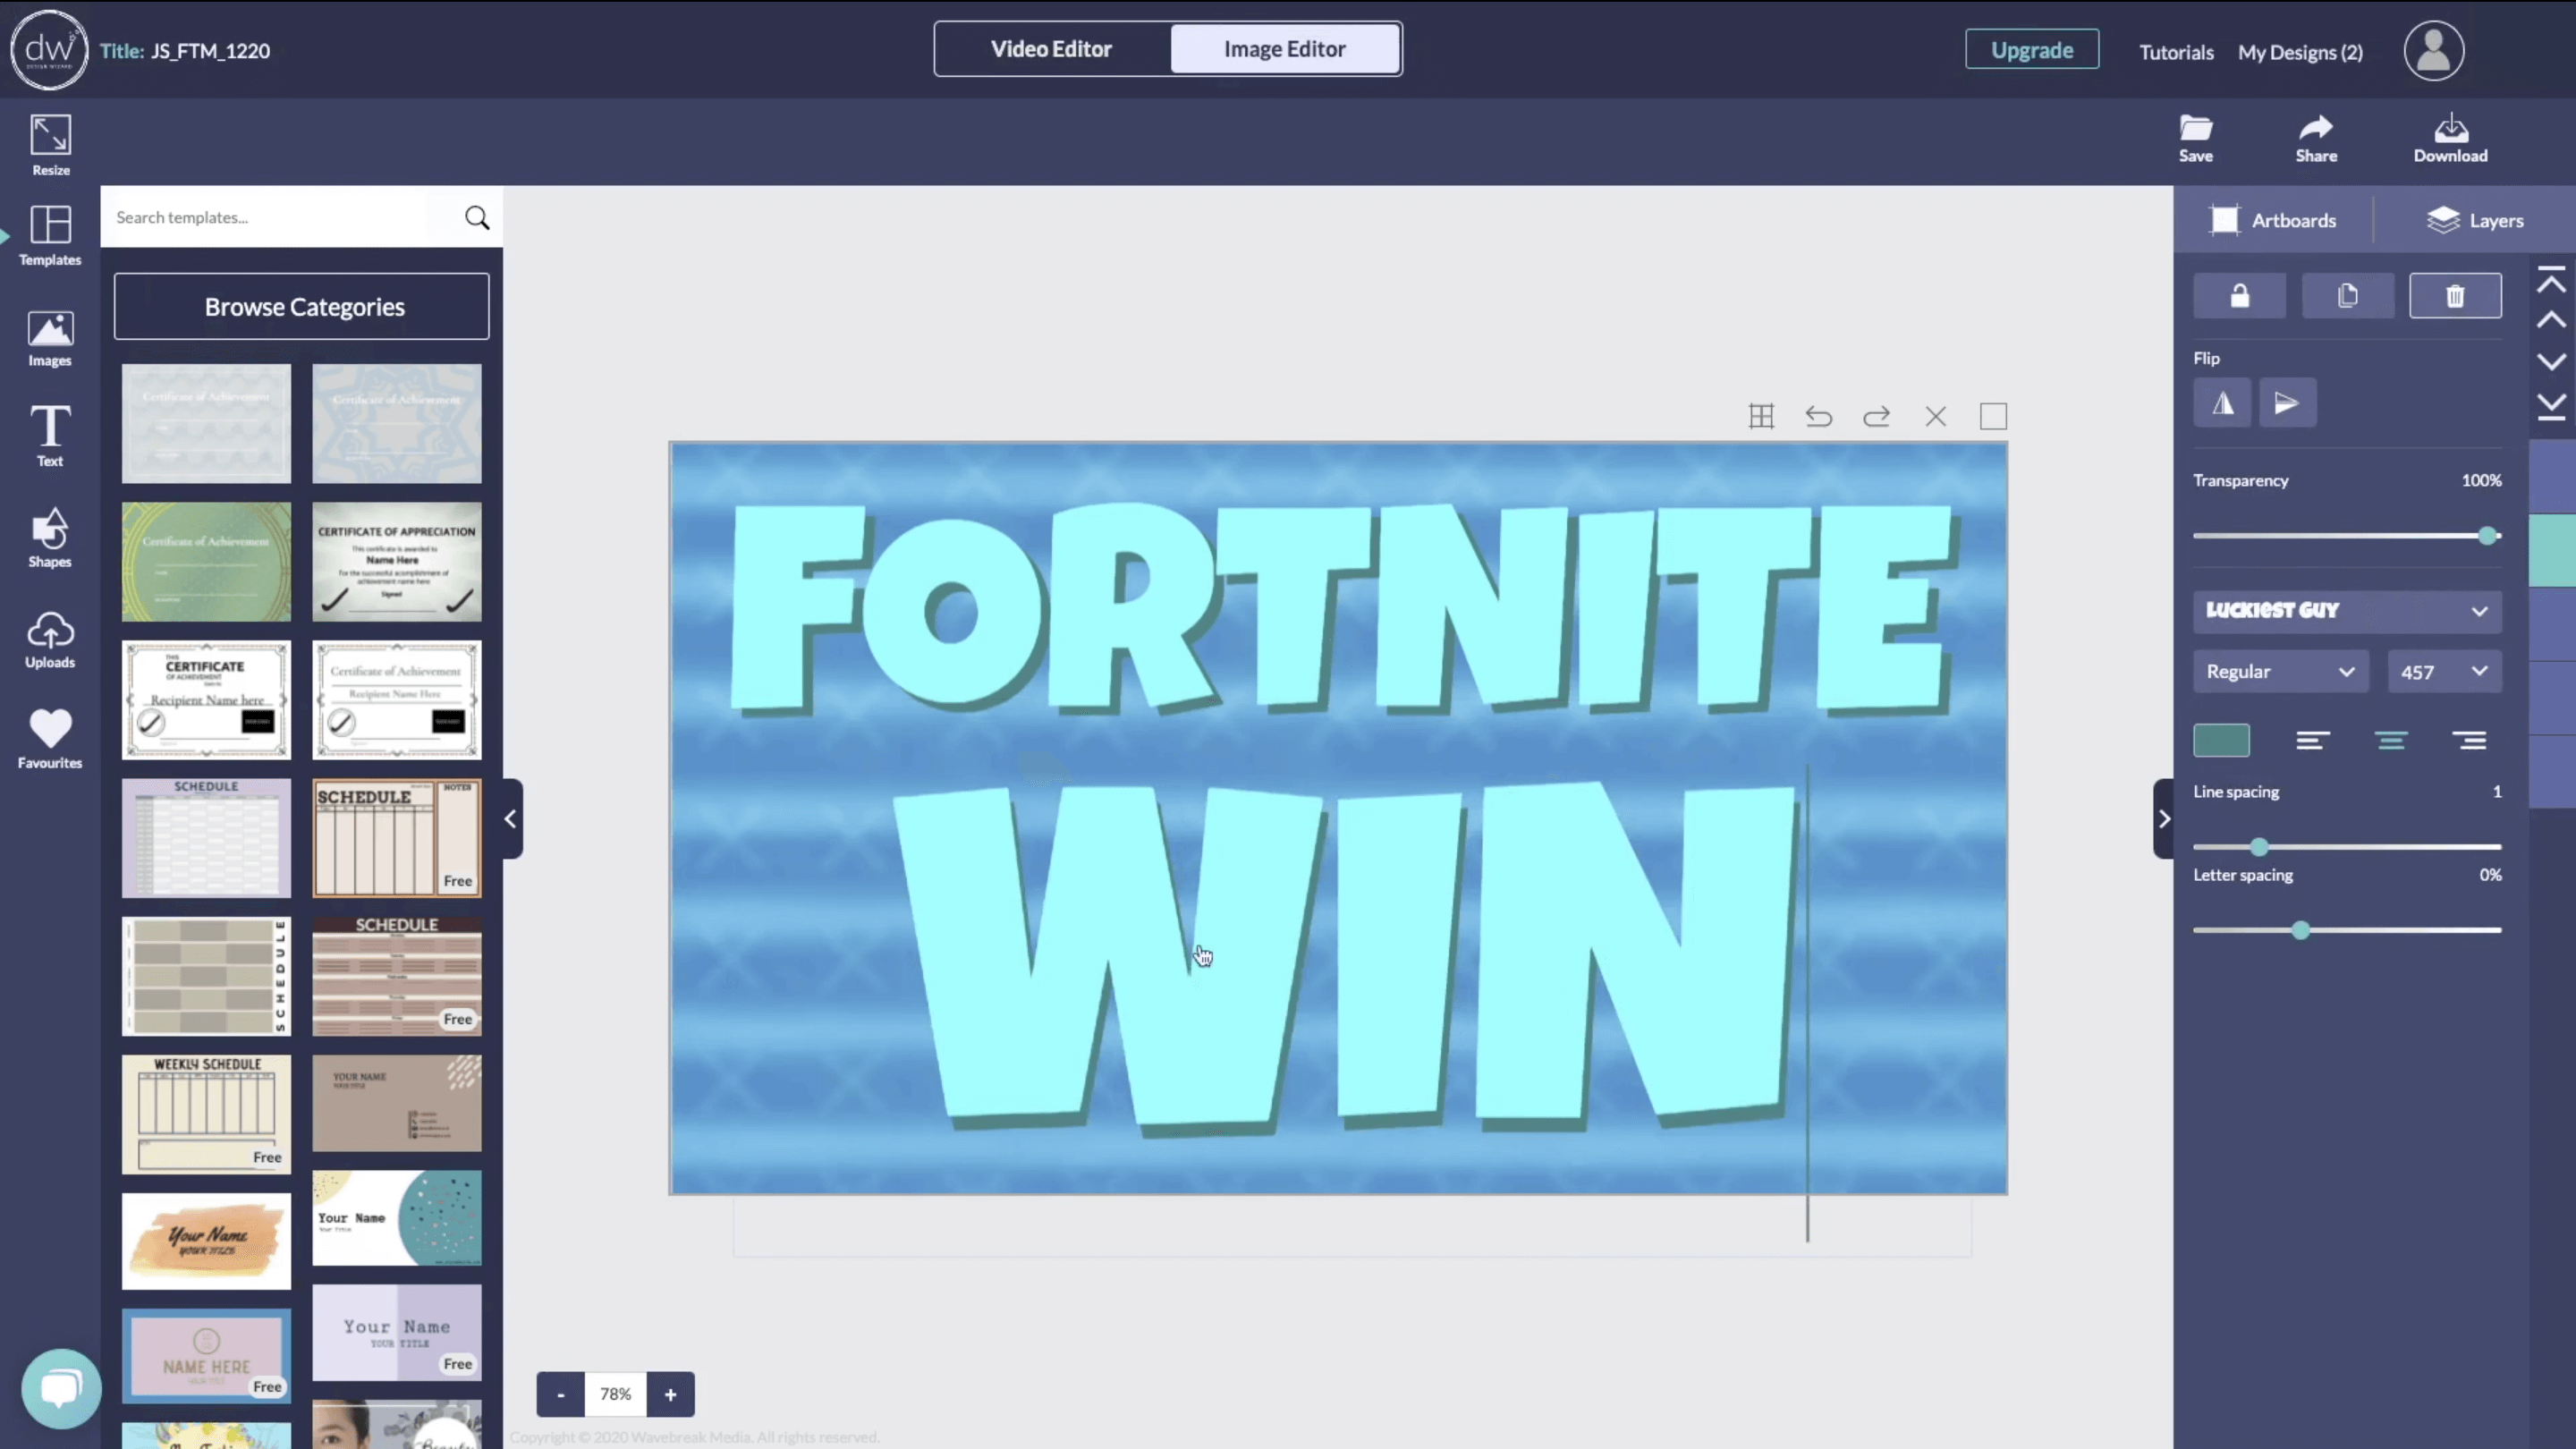 The process of editing a Fortnite video thumbnail using the Design Wizard - Step-by-step guide to designing YouTube thumbnails - Image